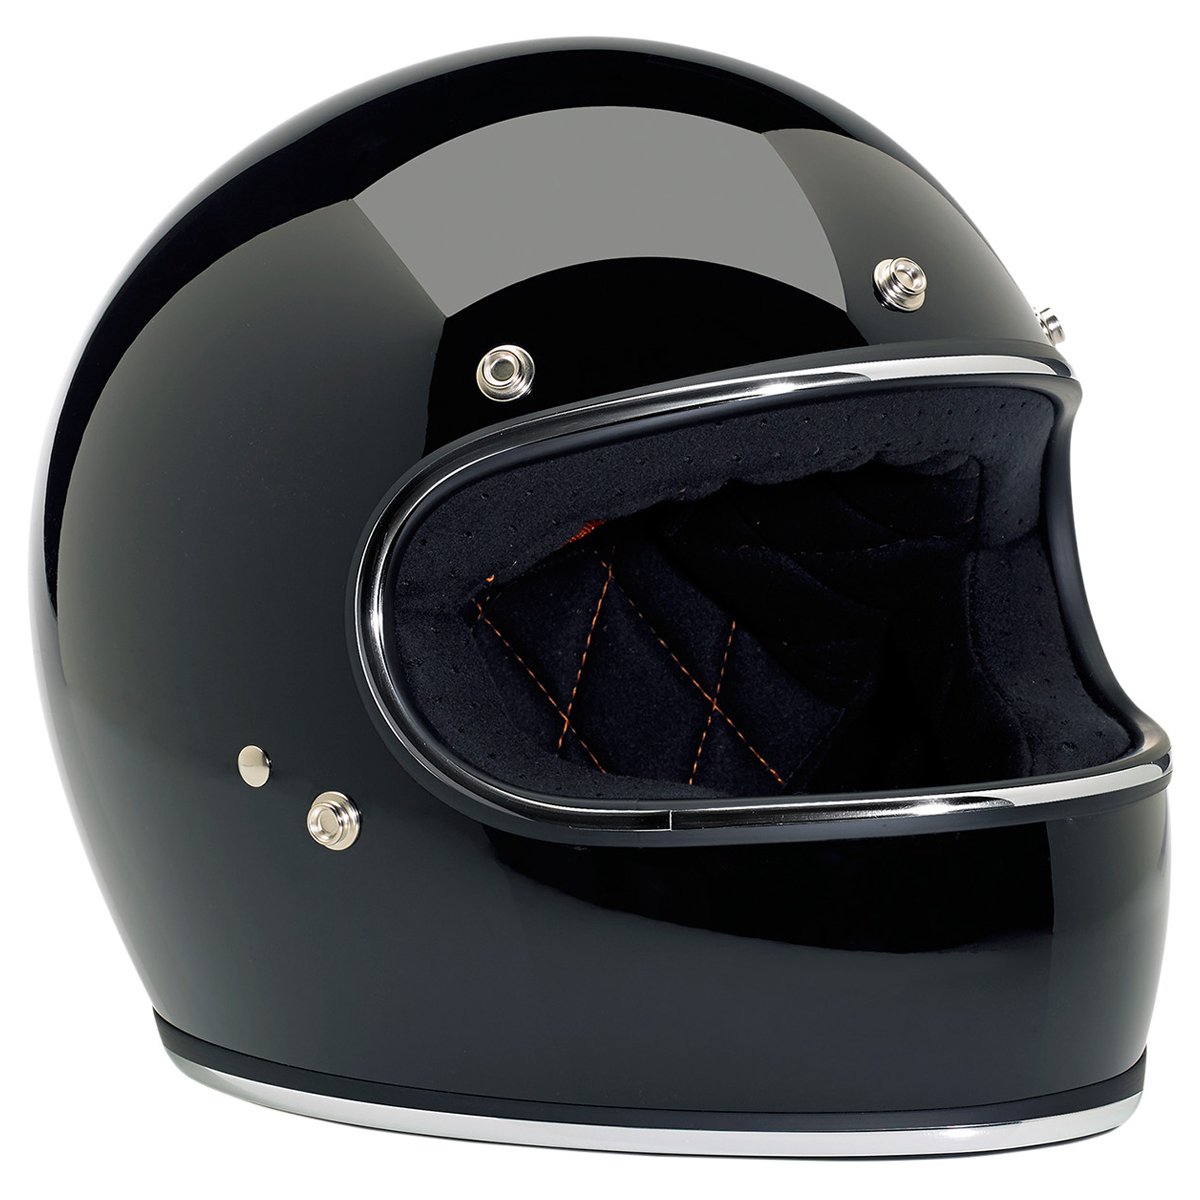 Biltwell Gringo Helmet Review: Retro Style, Solid and Safe Construction